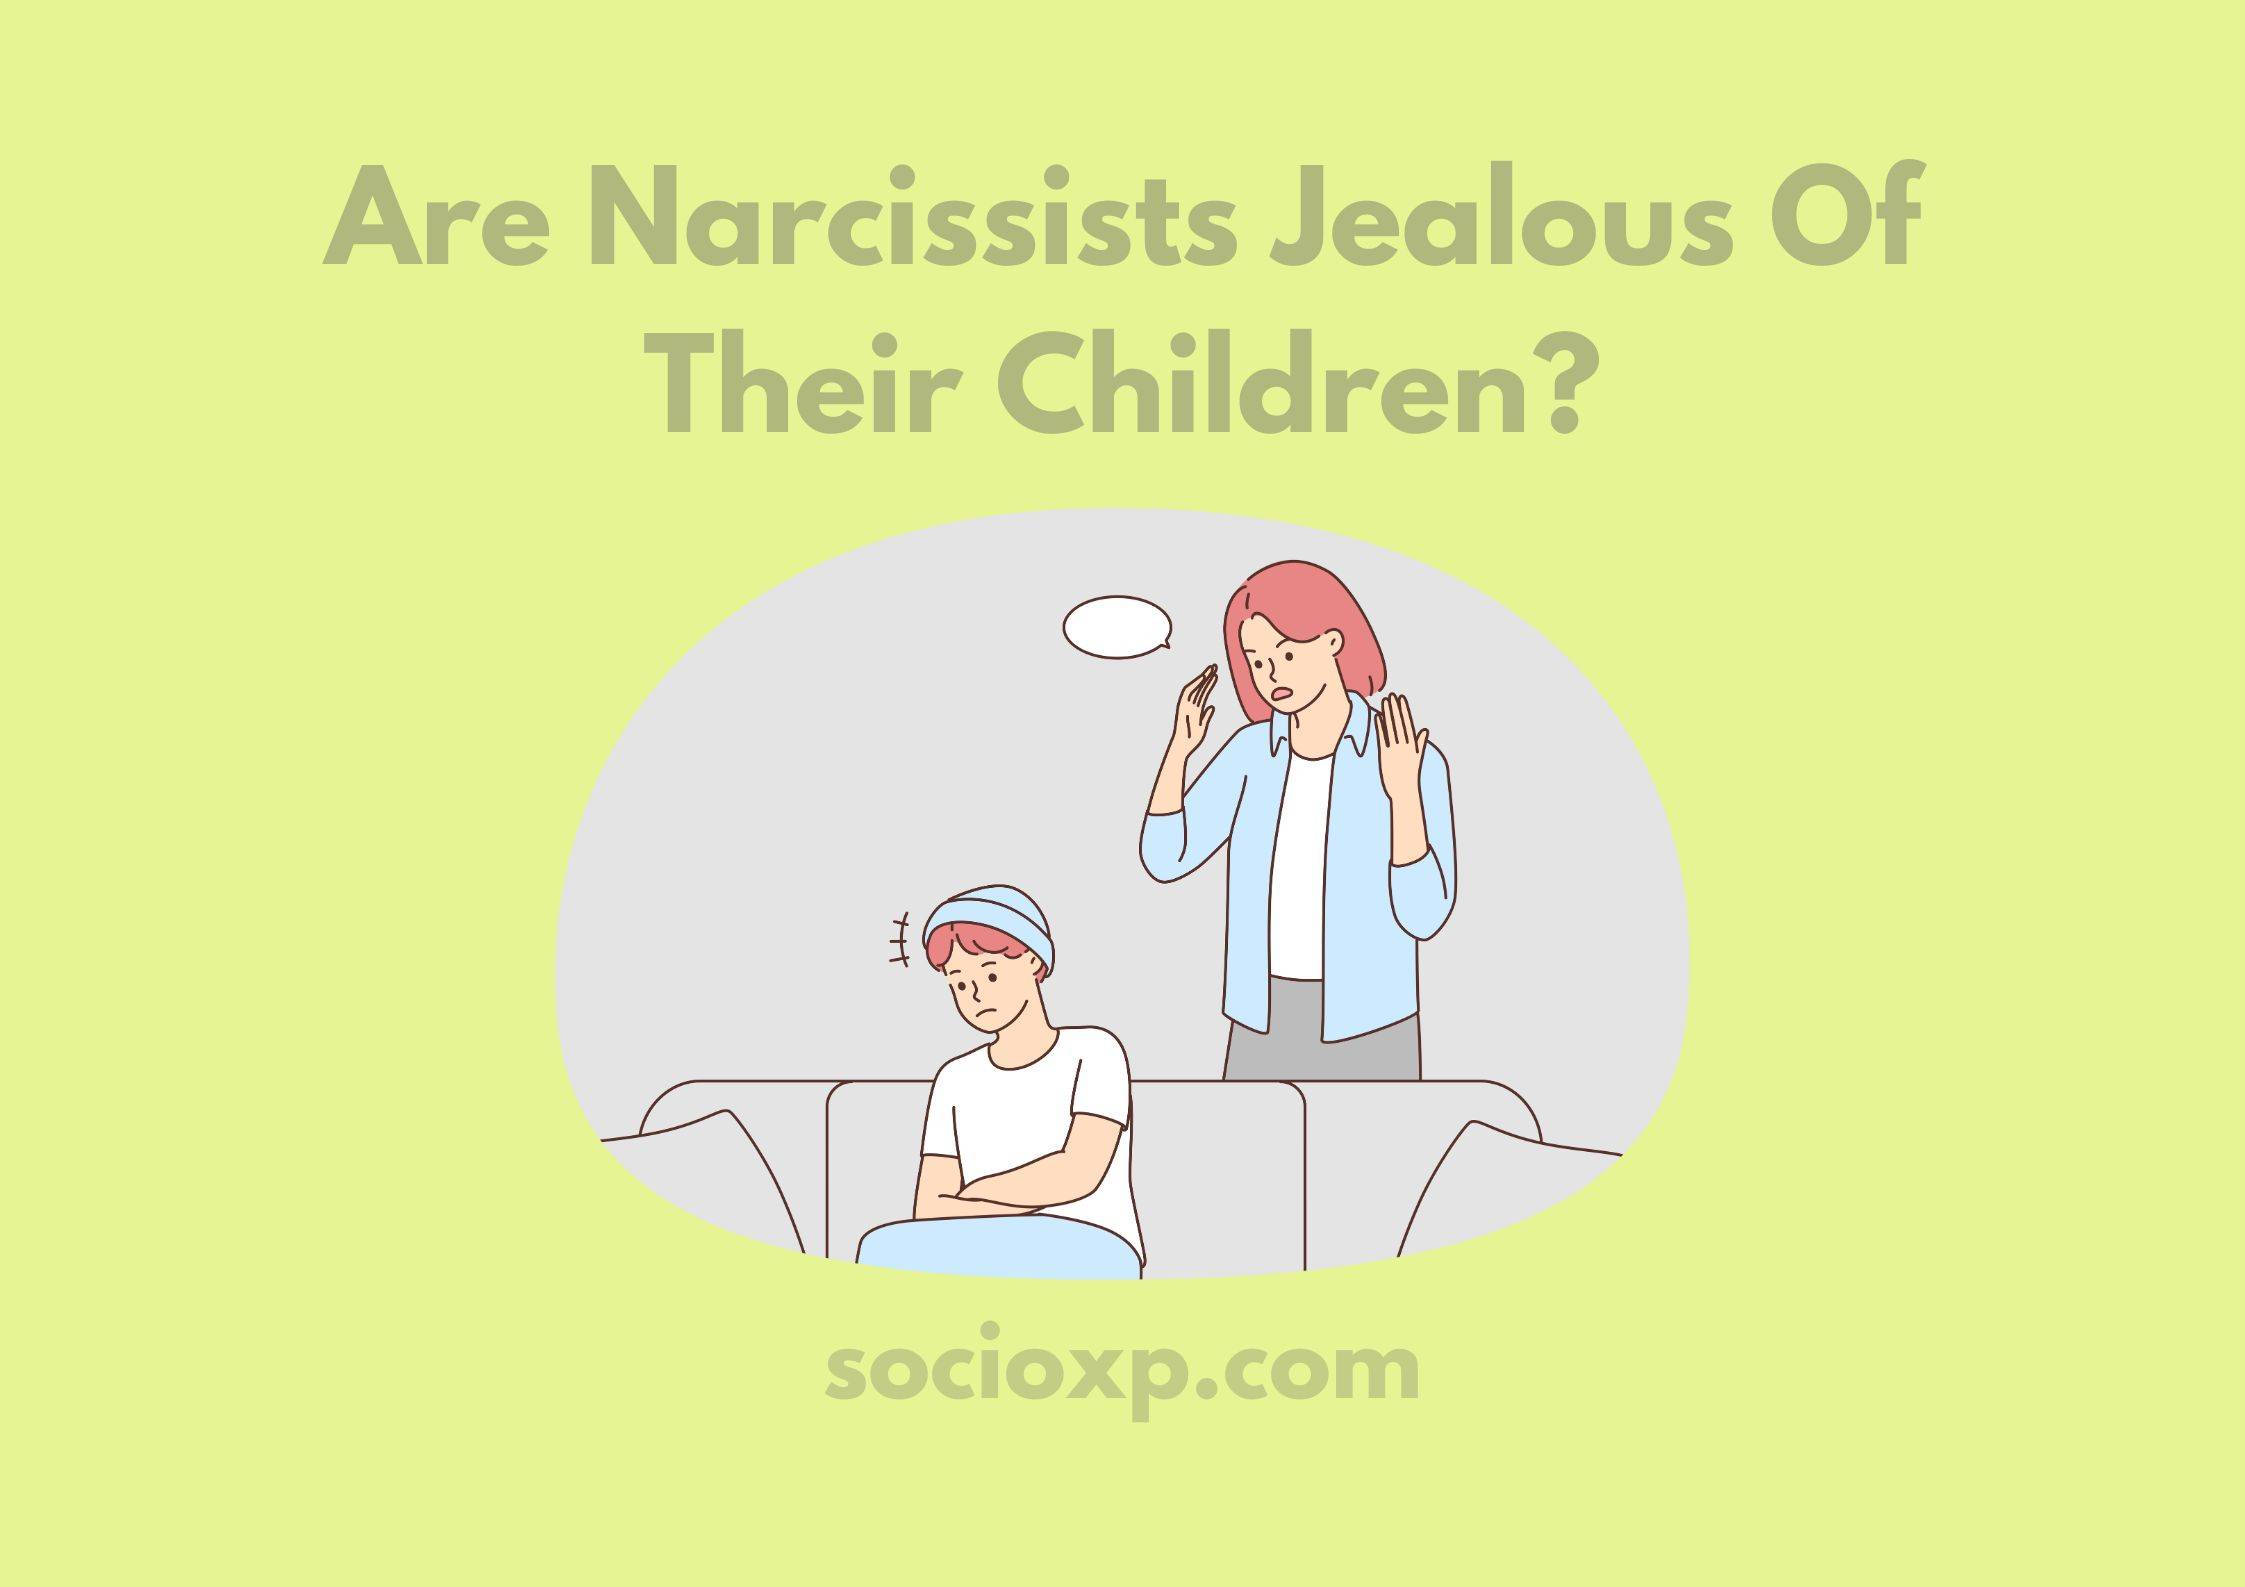 Are Narcissists Jealous Of Their Children?